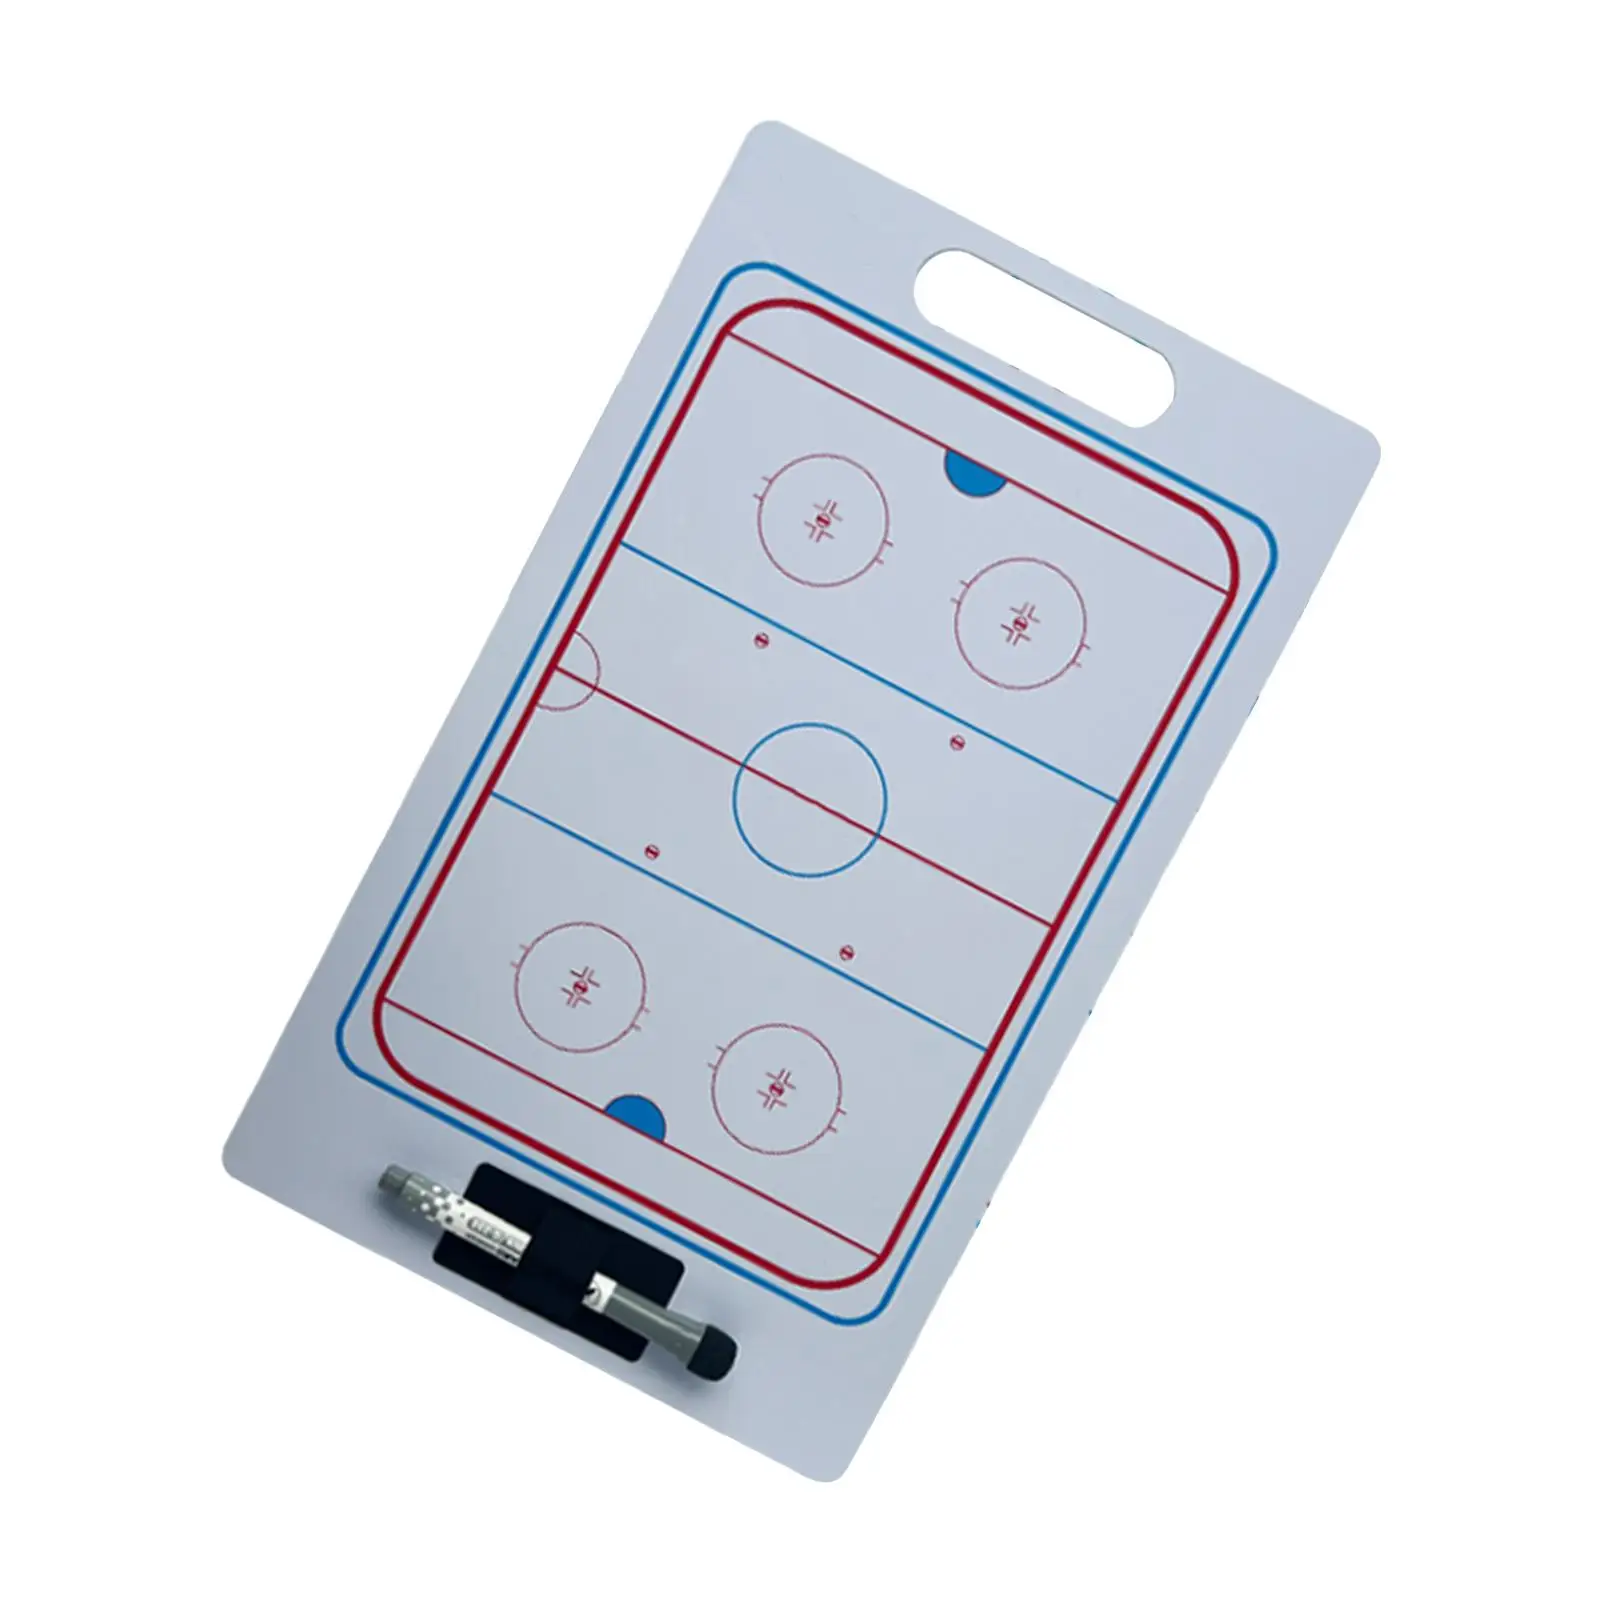 Hockey Coaching Boards Football Coaching Boards Guidance Training Aid Practice Board Teaching Assistant Referee Tactic Board